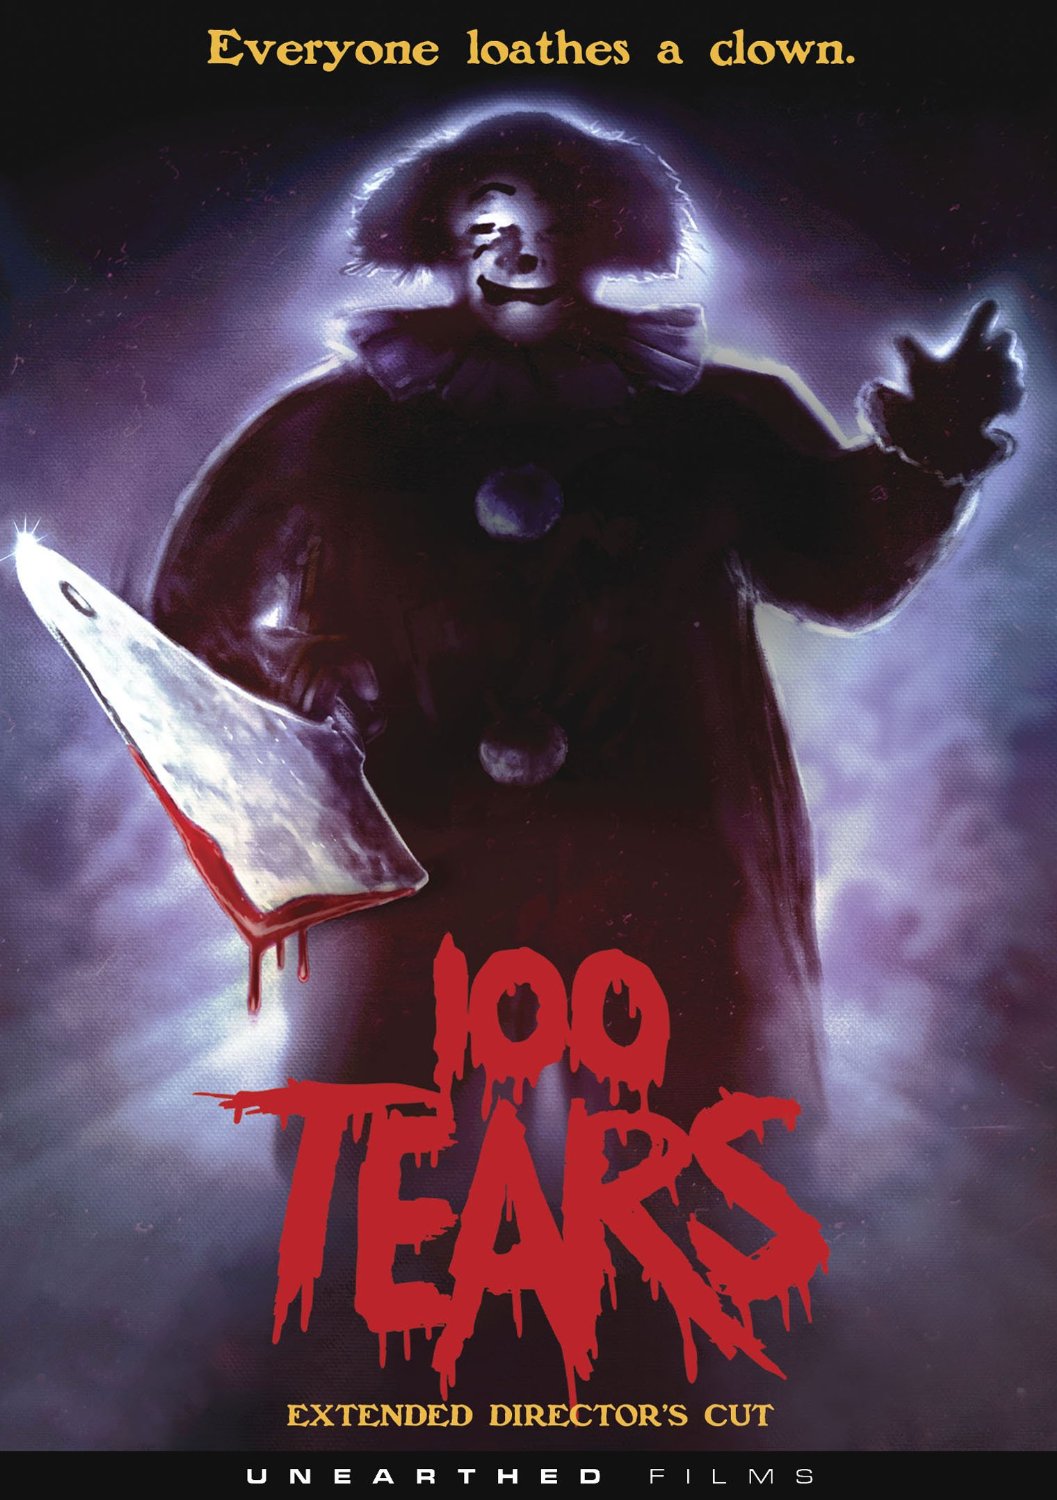 100-tears-extended-directors-cut-marcus-koch-unearthed-films-dvd